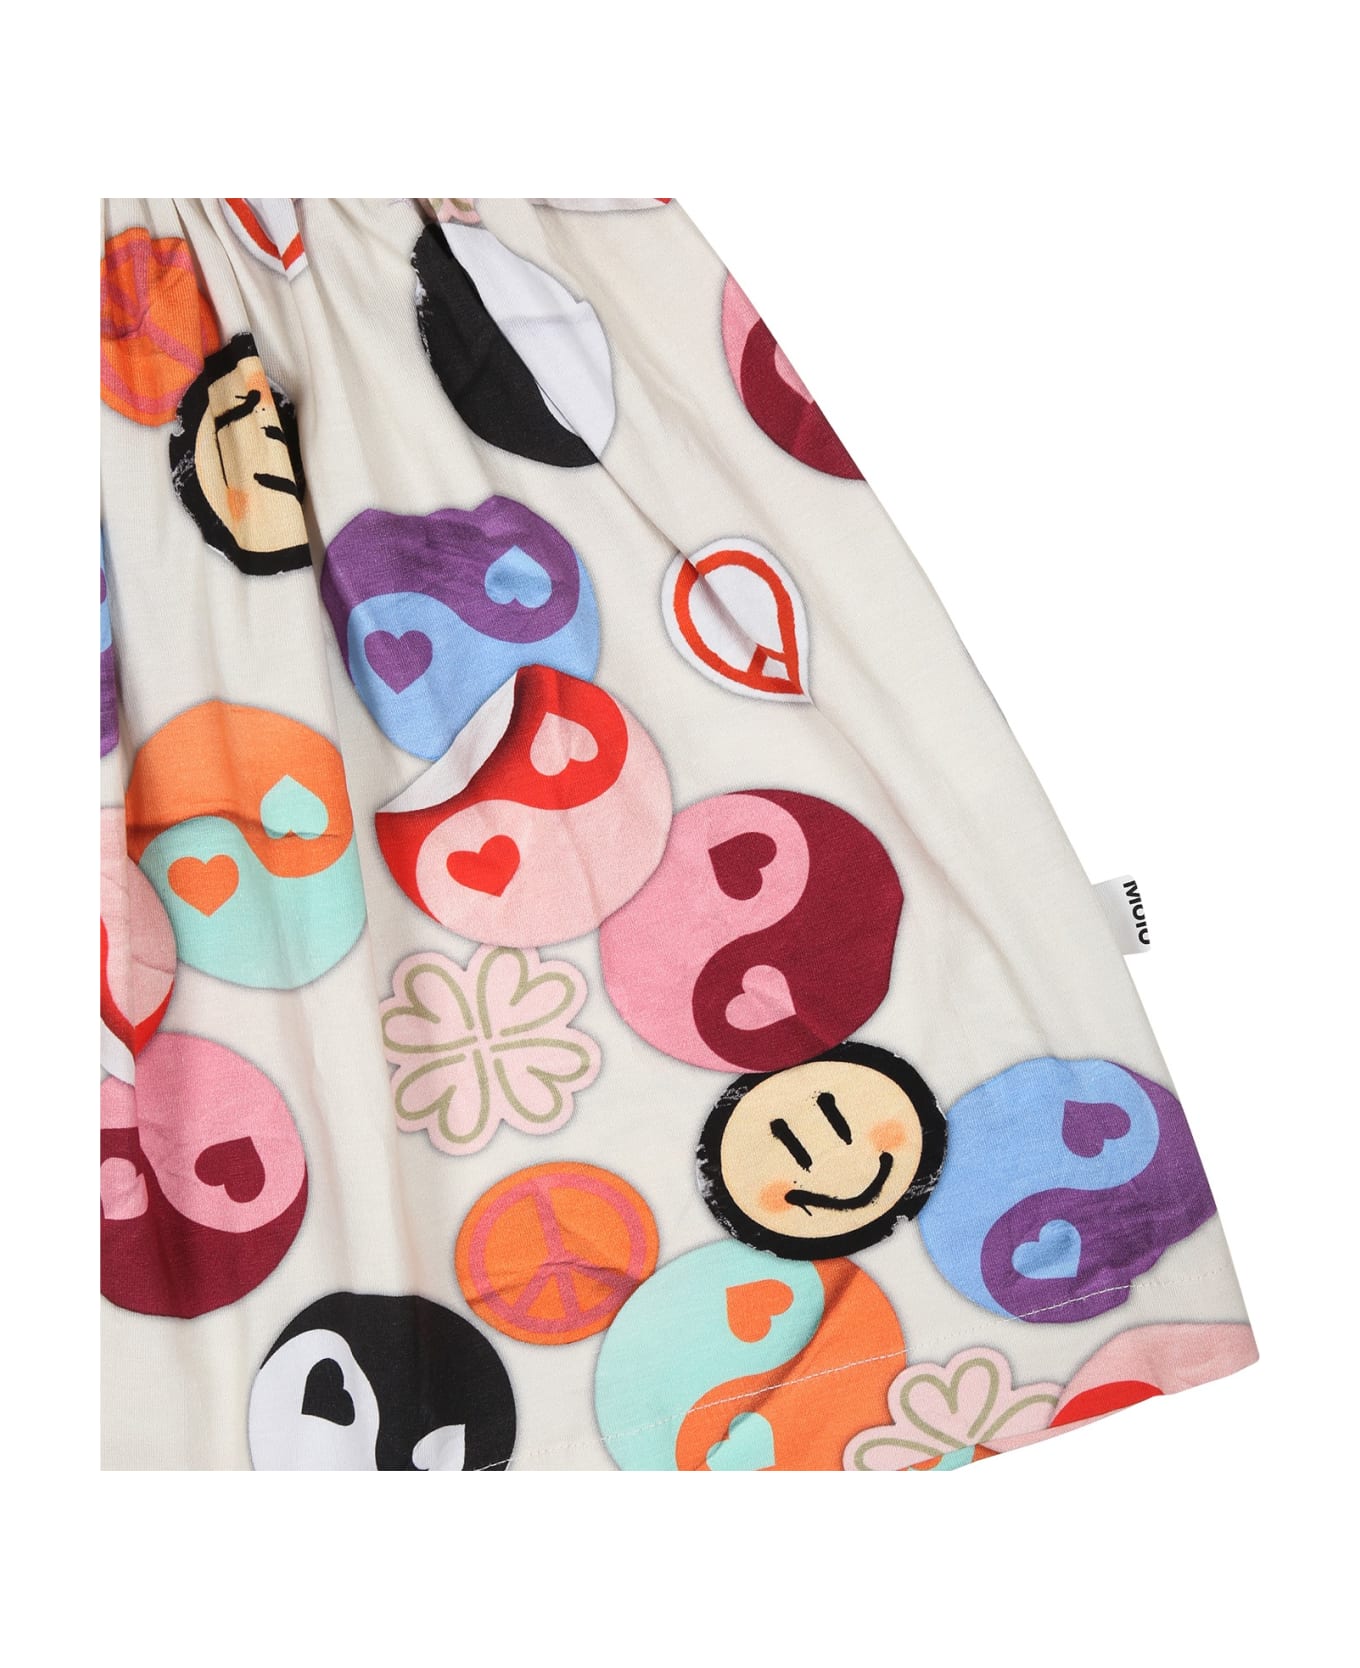 Molo Ivory Dress For Girl With Smiley And Yin And Yang Print - Multicolor